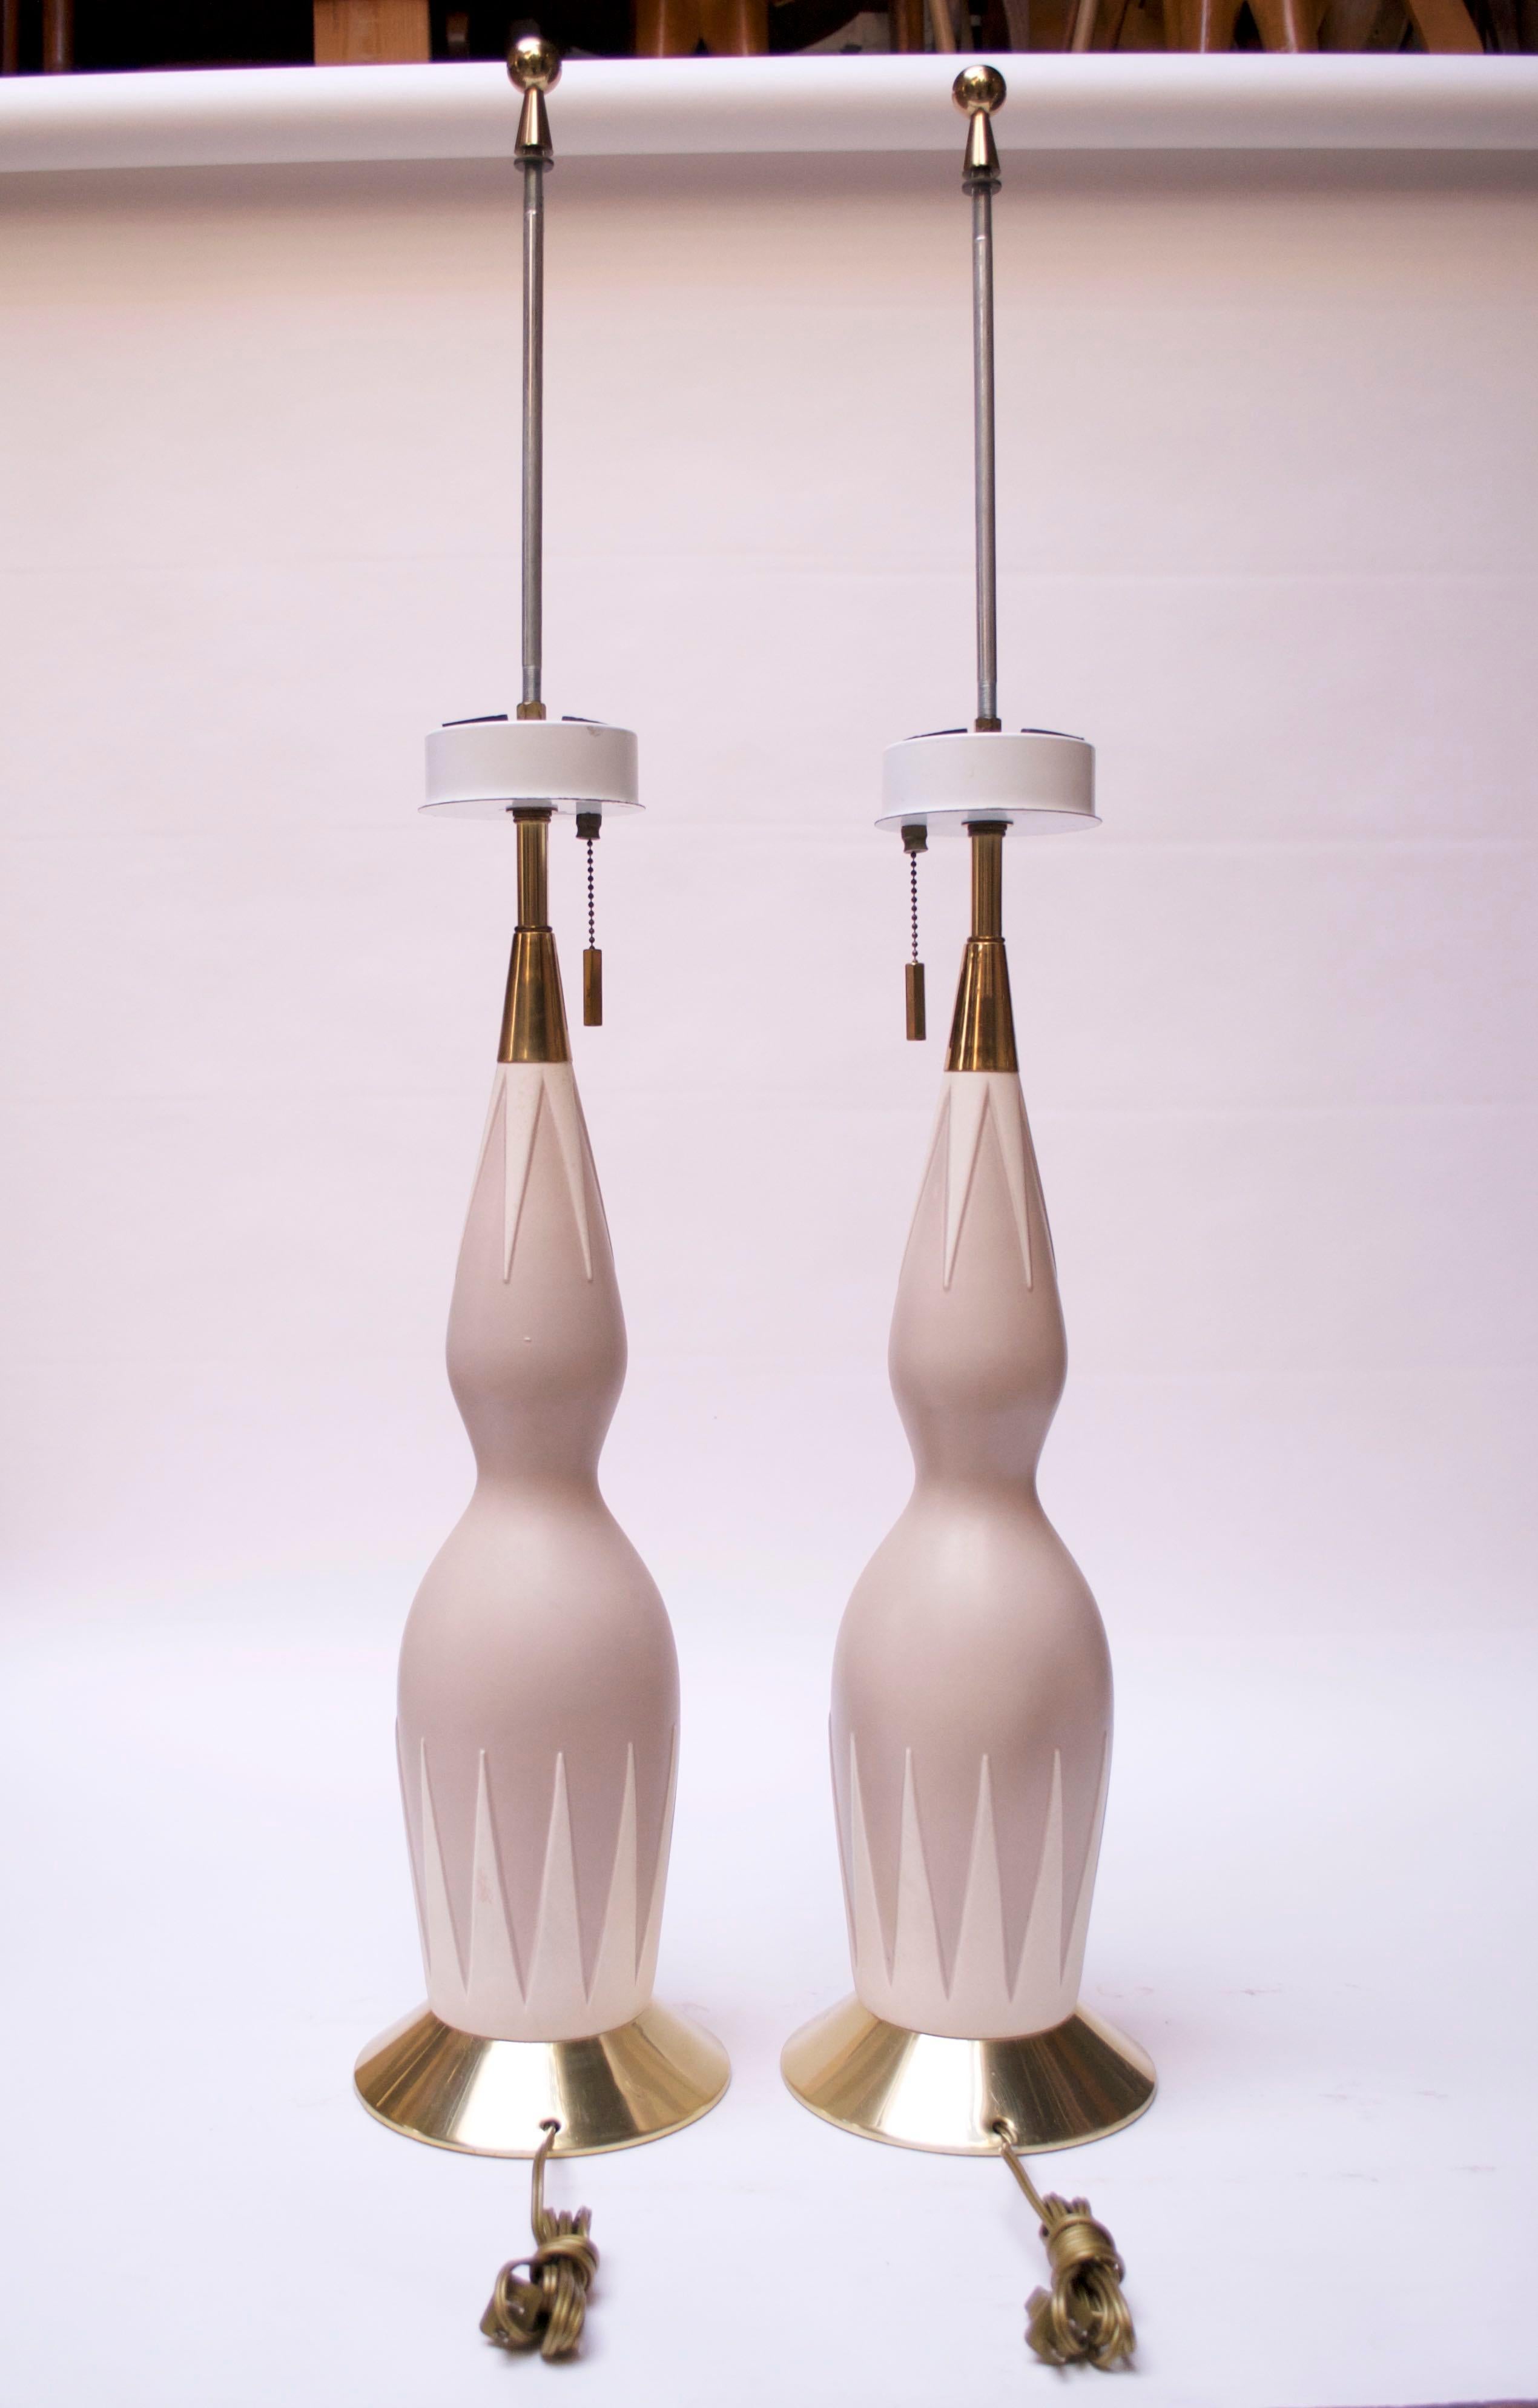 American Pair of Tall Decorative Ceramic and Brass Table Lamps by Gerald Thurston For Sale